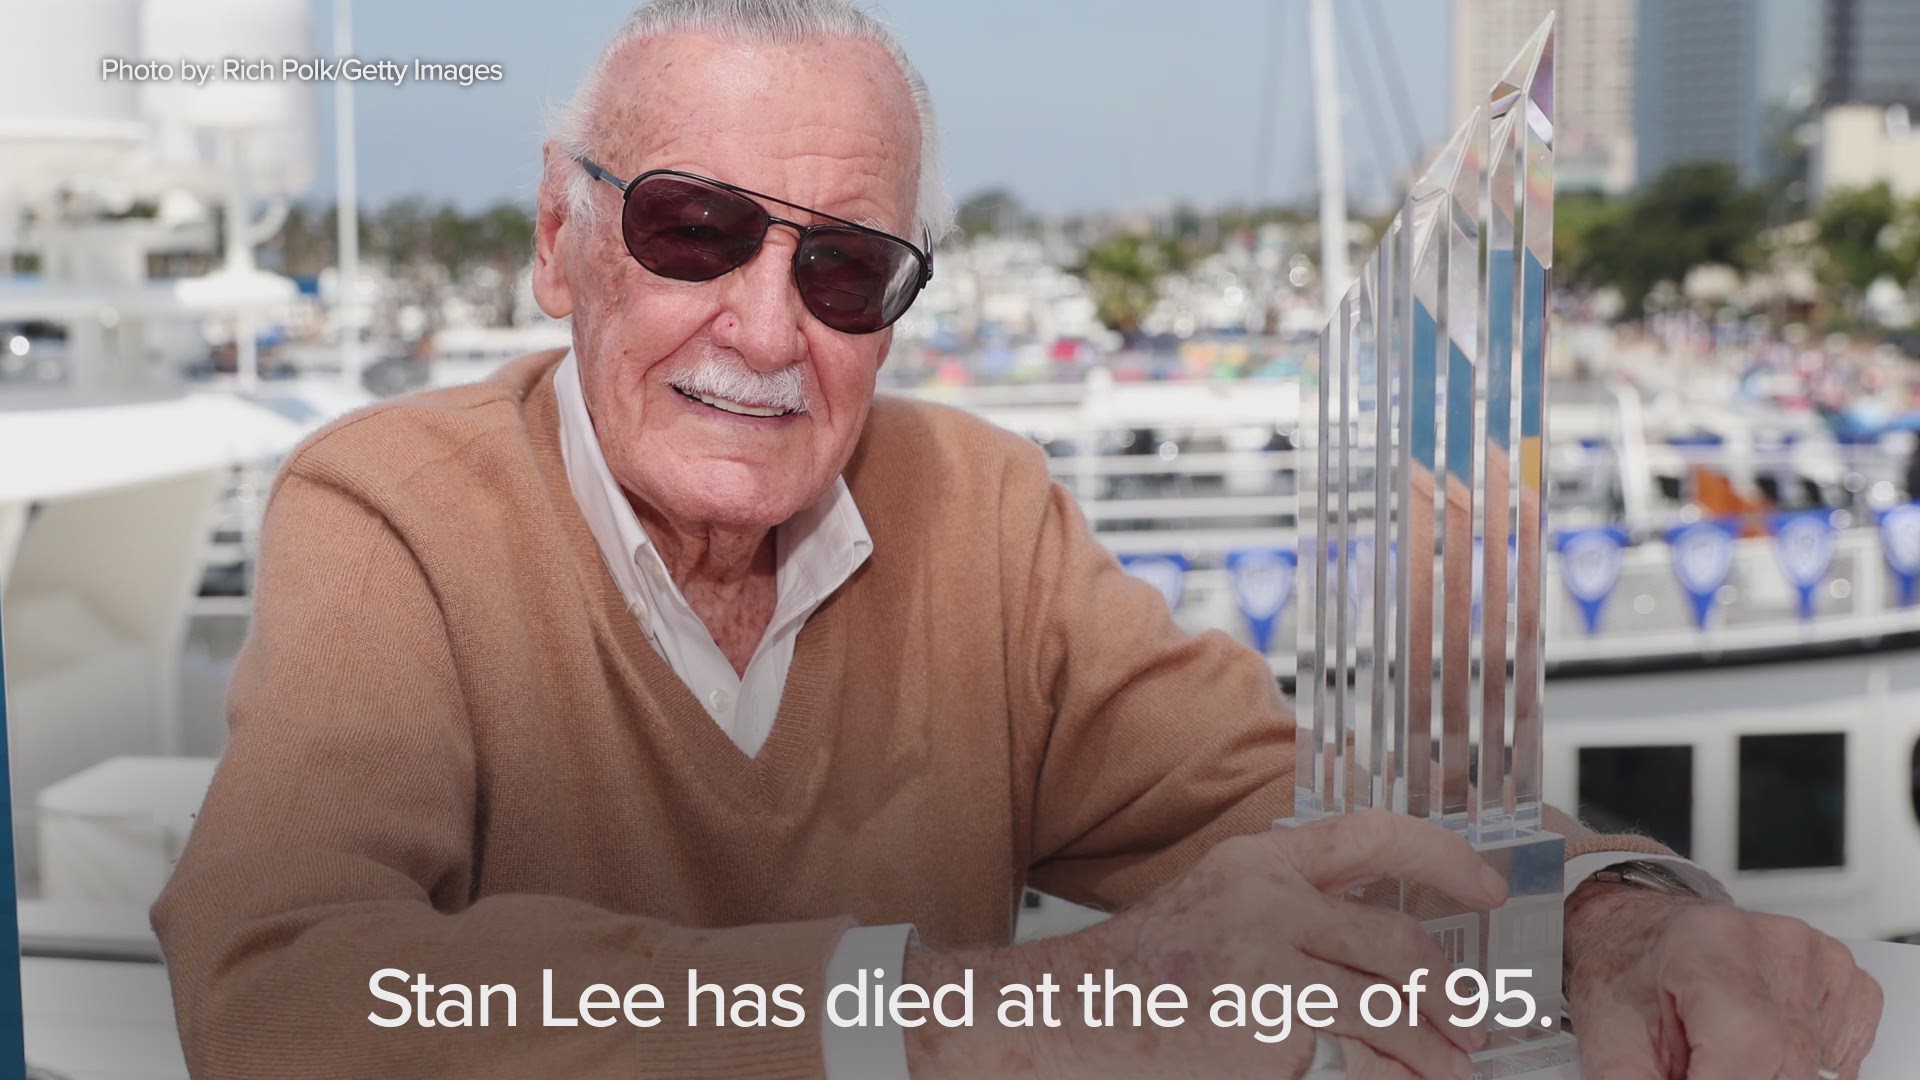 Stan Lee co-founded Marvel Comics and created or co-created some of the most iconic characters including Spider-Man, the X-Men, Black Panther and more.